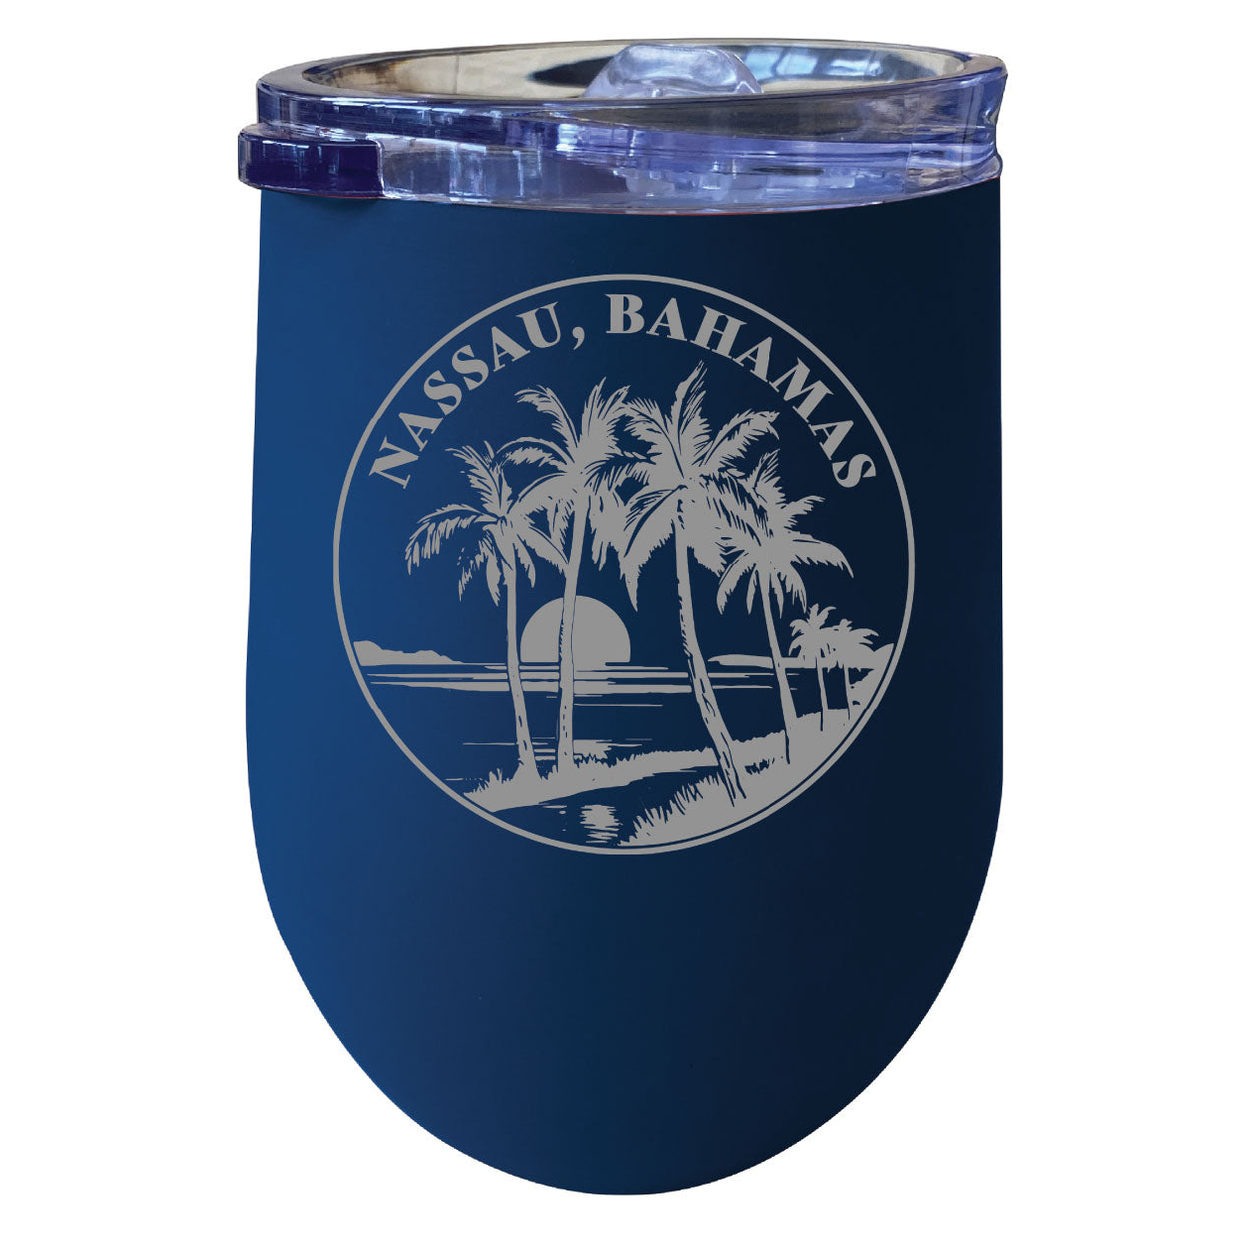 Nassau The Bahamas Souvenir 12 Oz Engraved Insulated Wine Stainless Steel Tumbler - Navy,,2-Pack